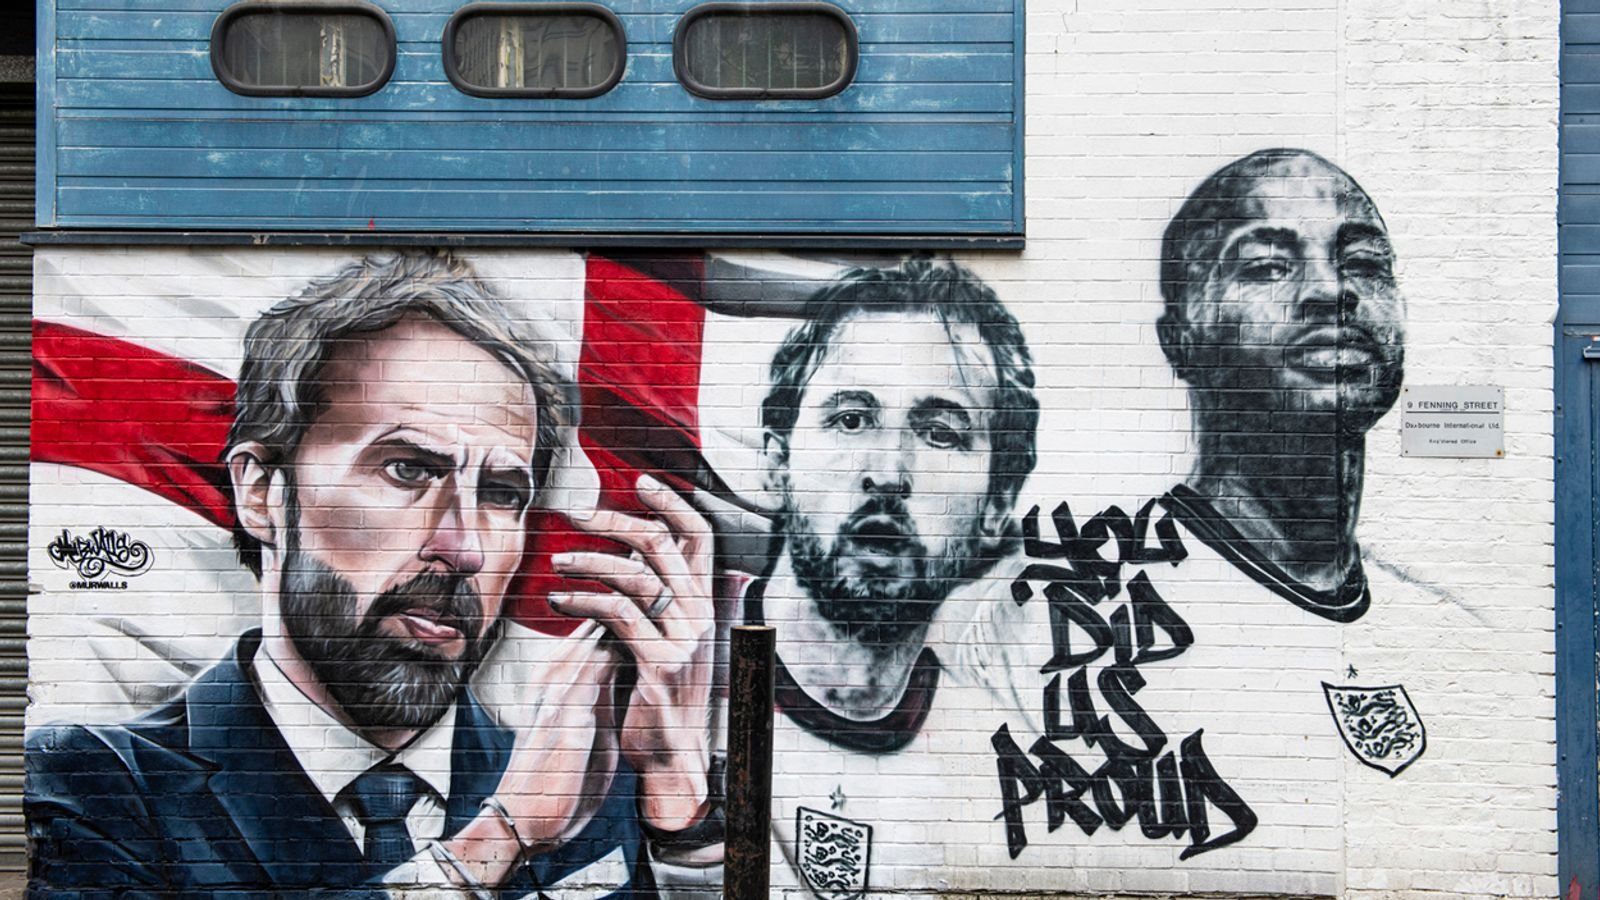 Euro 2020: Mural of Gareth Southgate, Harry Kane and Raheem Sterling unveiled in London